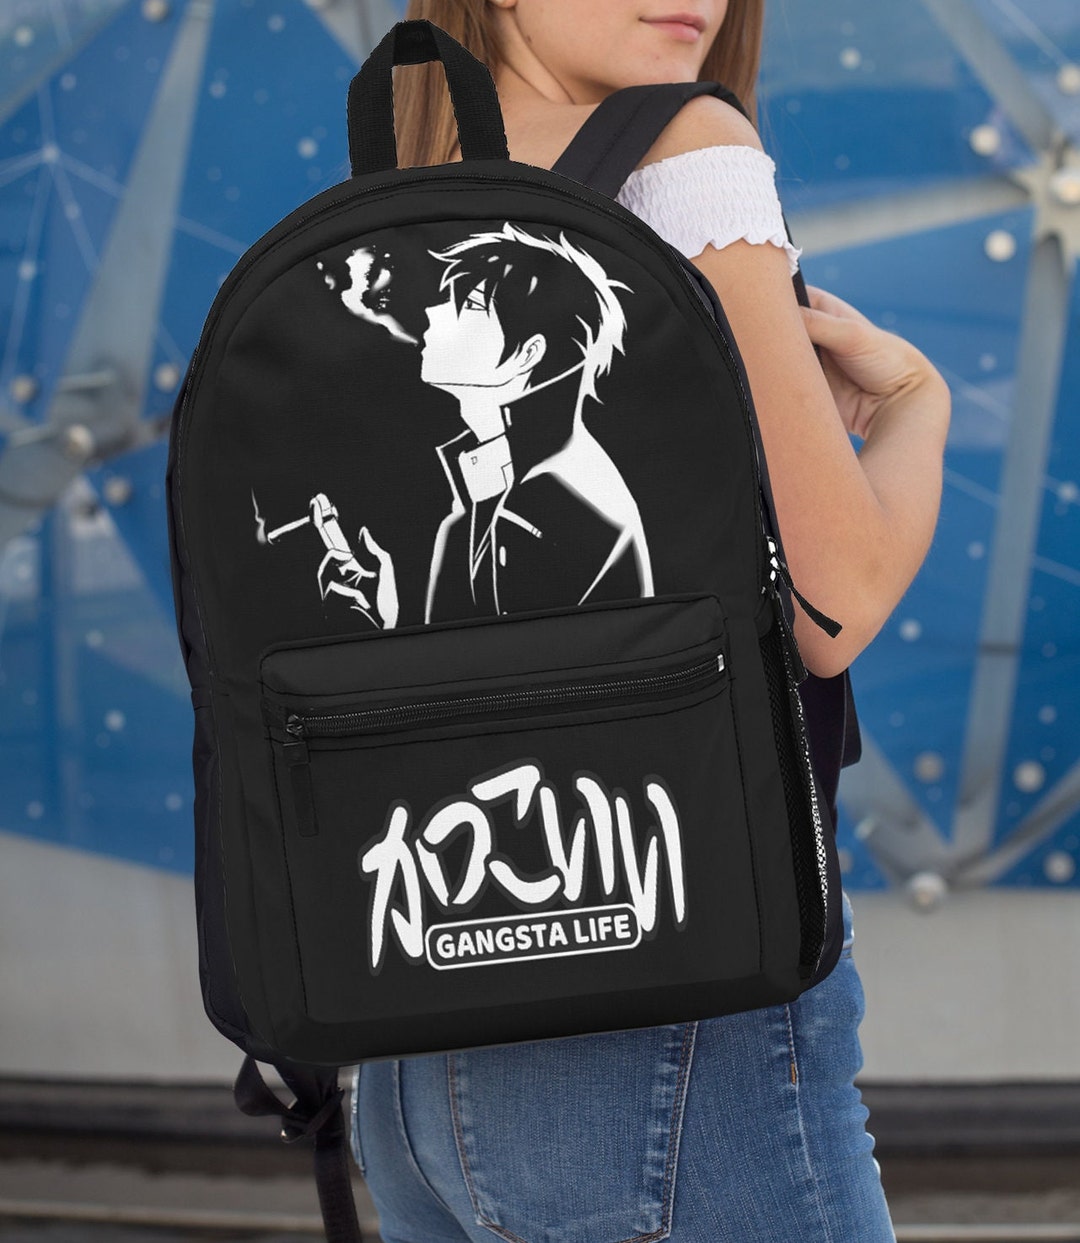 Gumstyle Death Note Luminous Backpack Anime Book Bag Casual School Bag   Amazonin Fashion